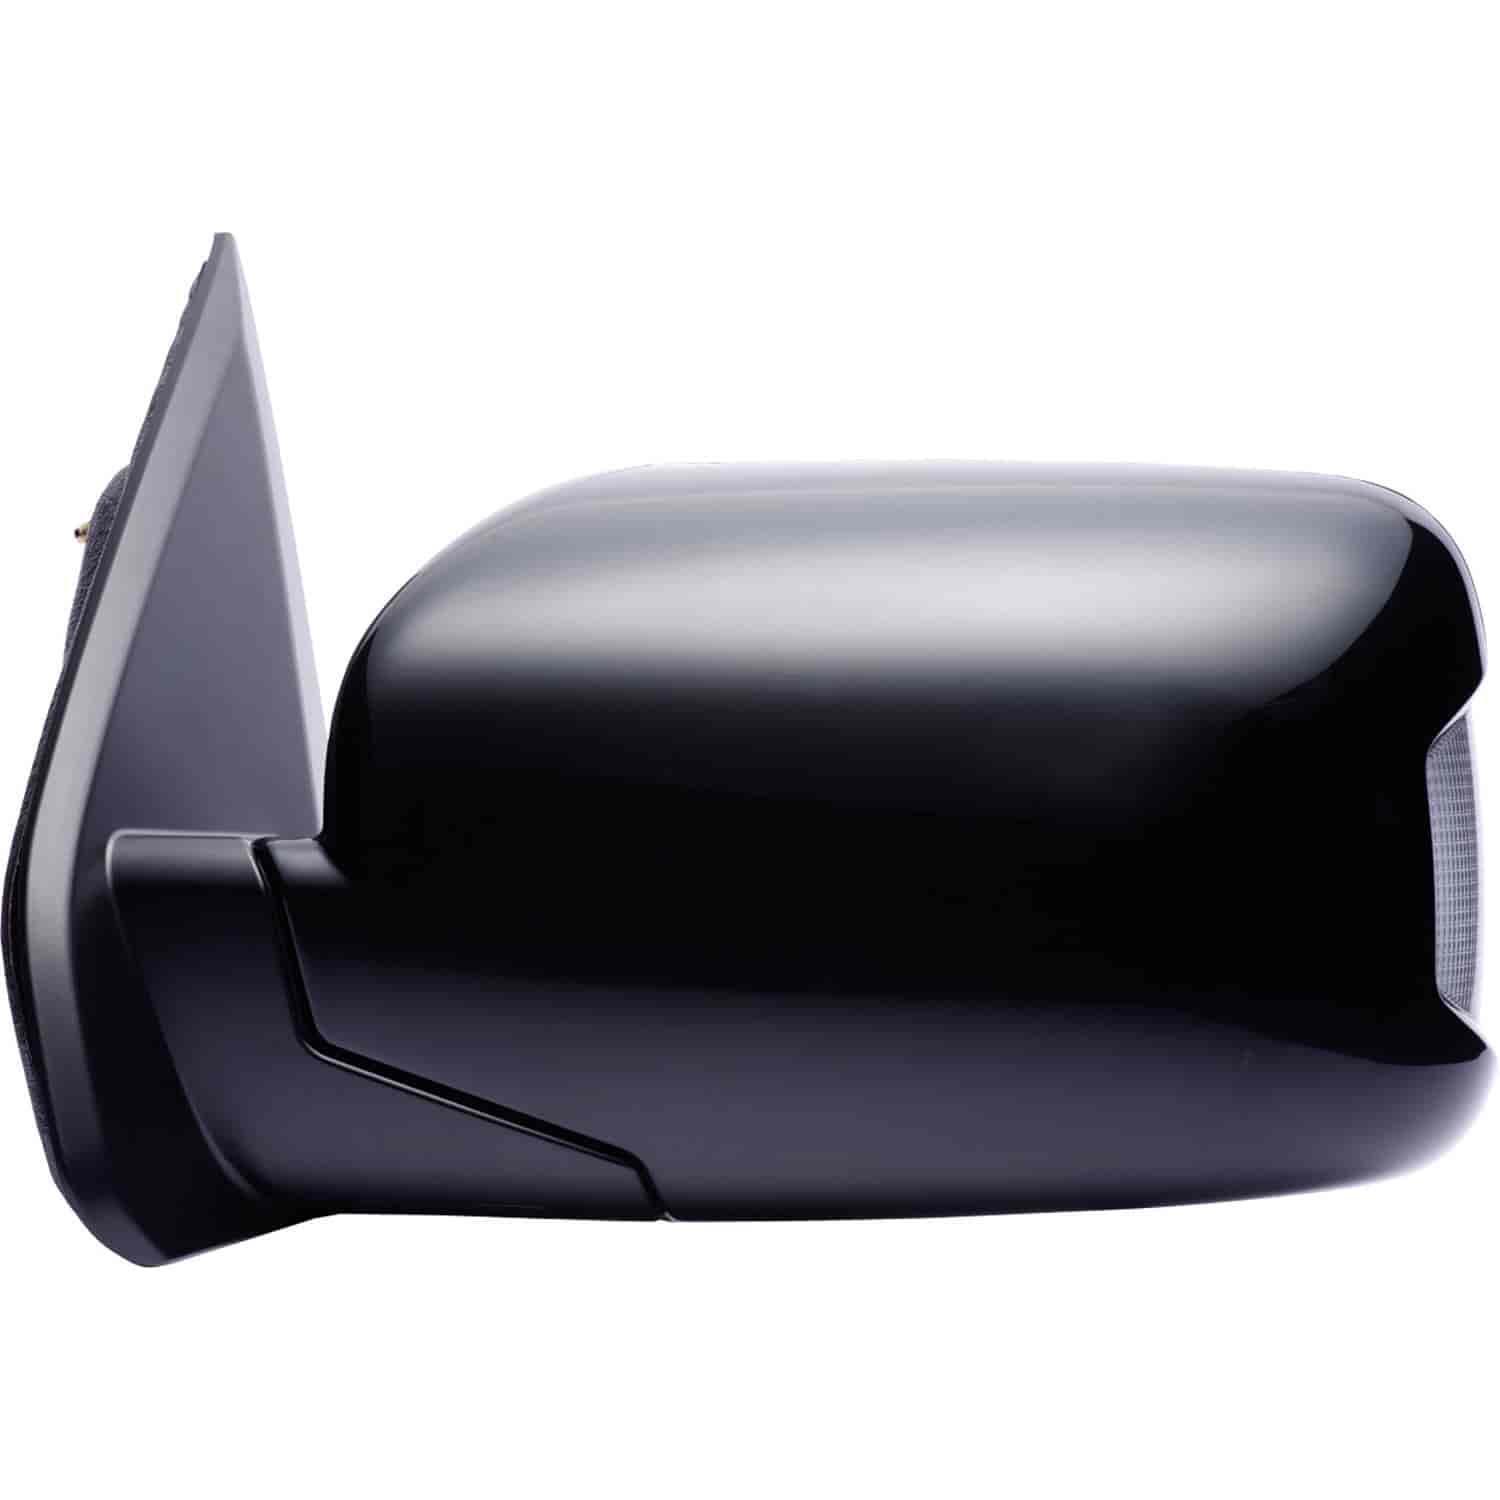 OEM Style Replacement mirror for 09-14 Honda Pilot